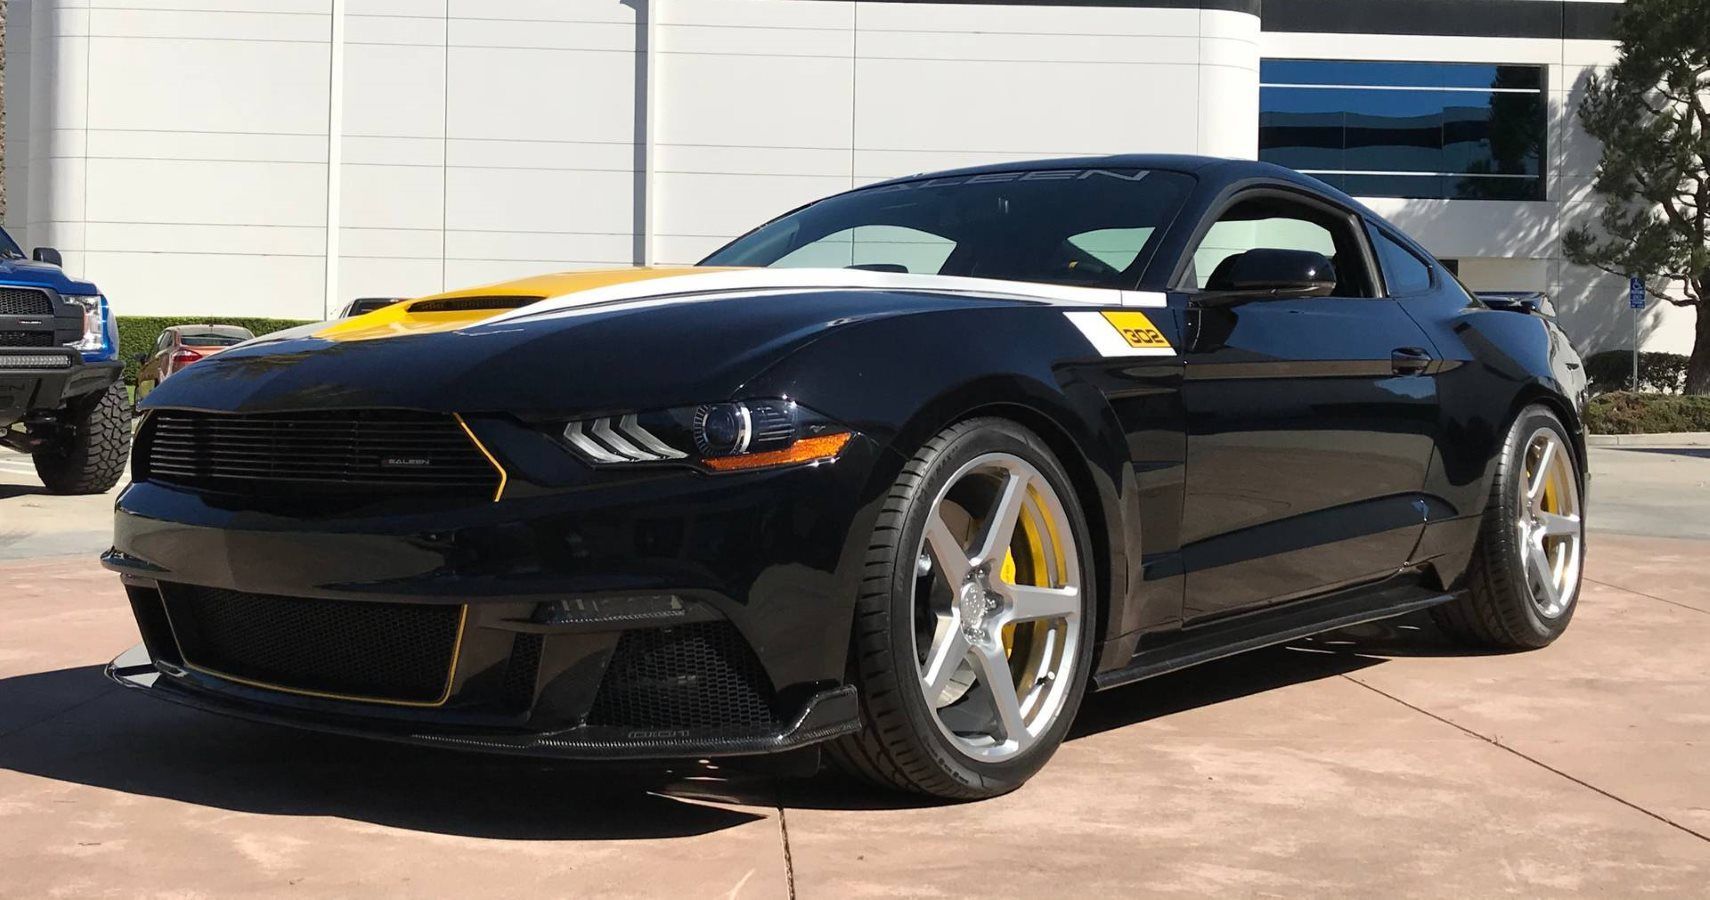 Saleen Beefs Up A Ford Mustang To Celebrate Their 35th Anniversary